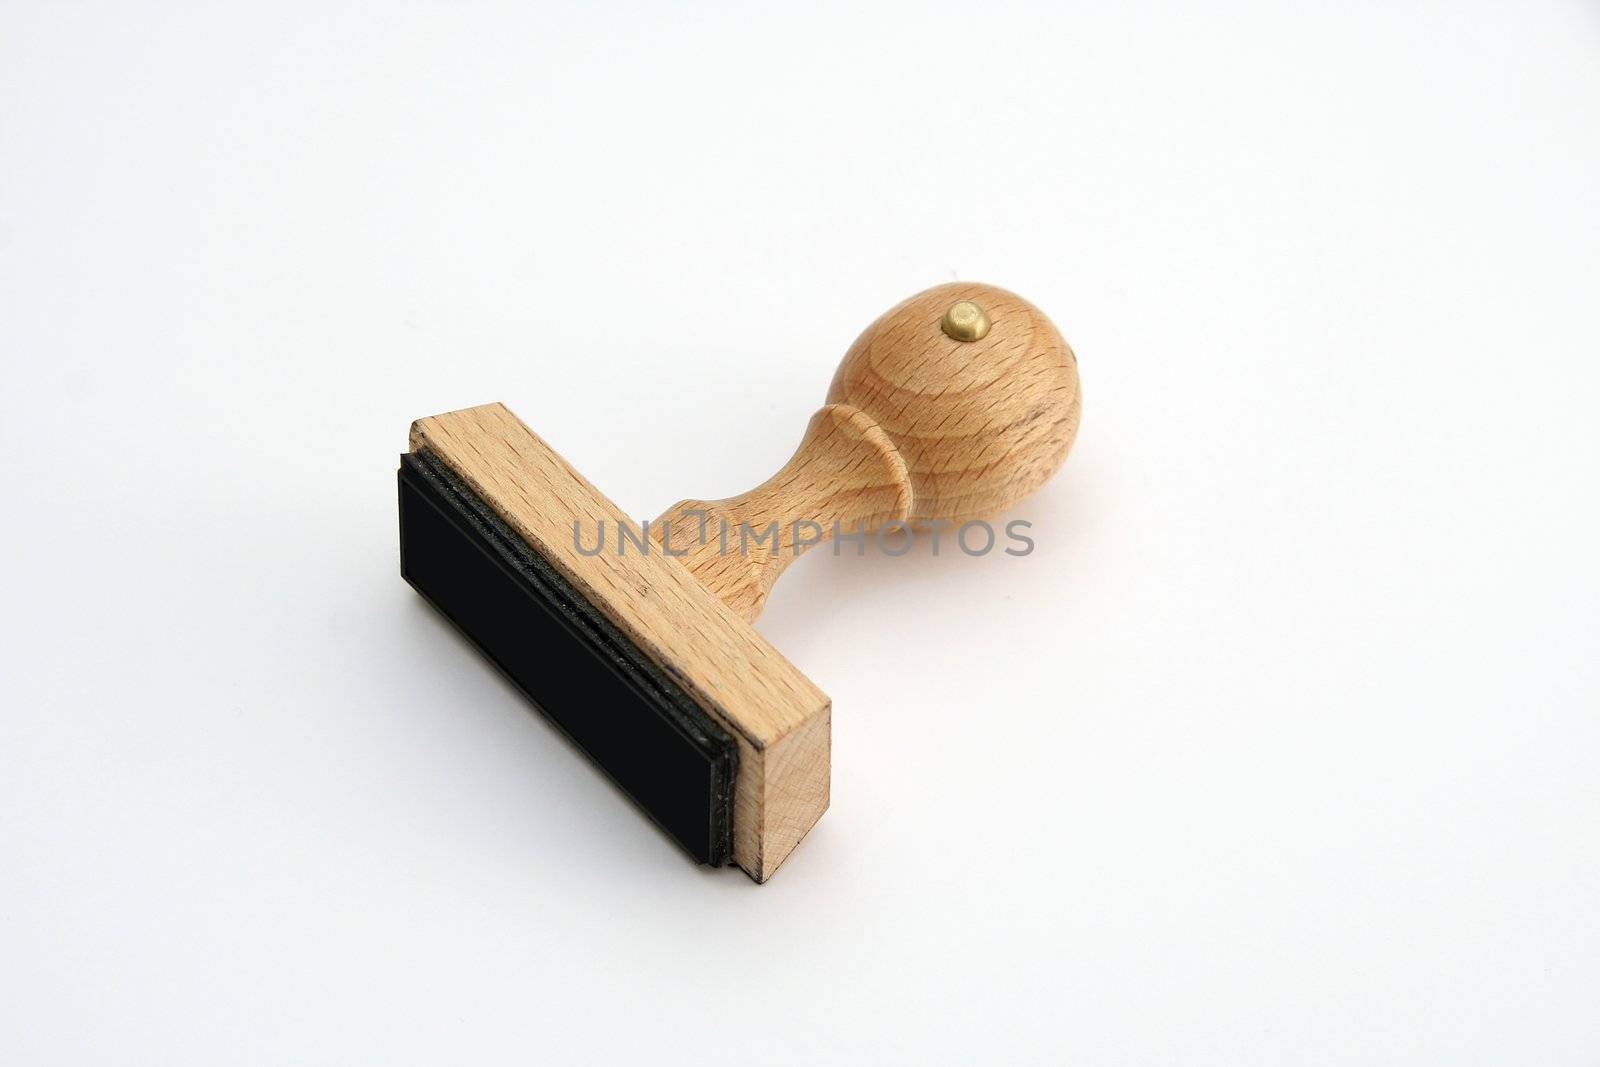 empty wooden stamp isolated on white background